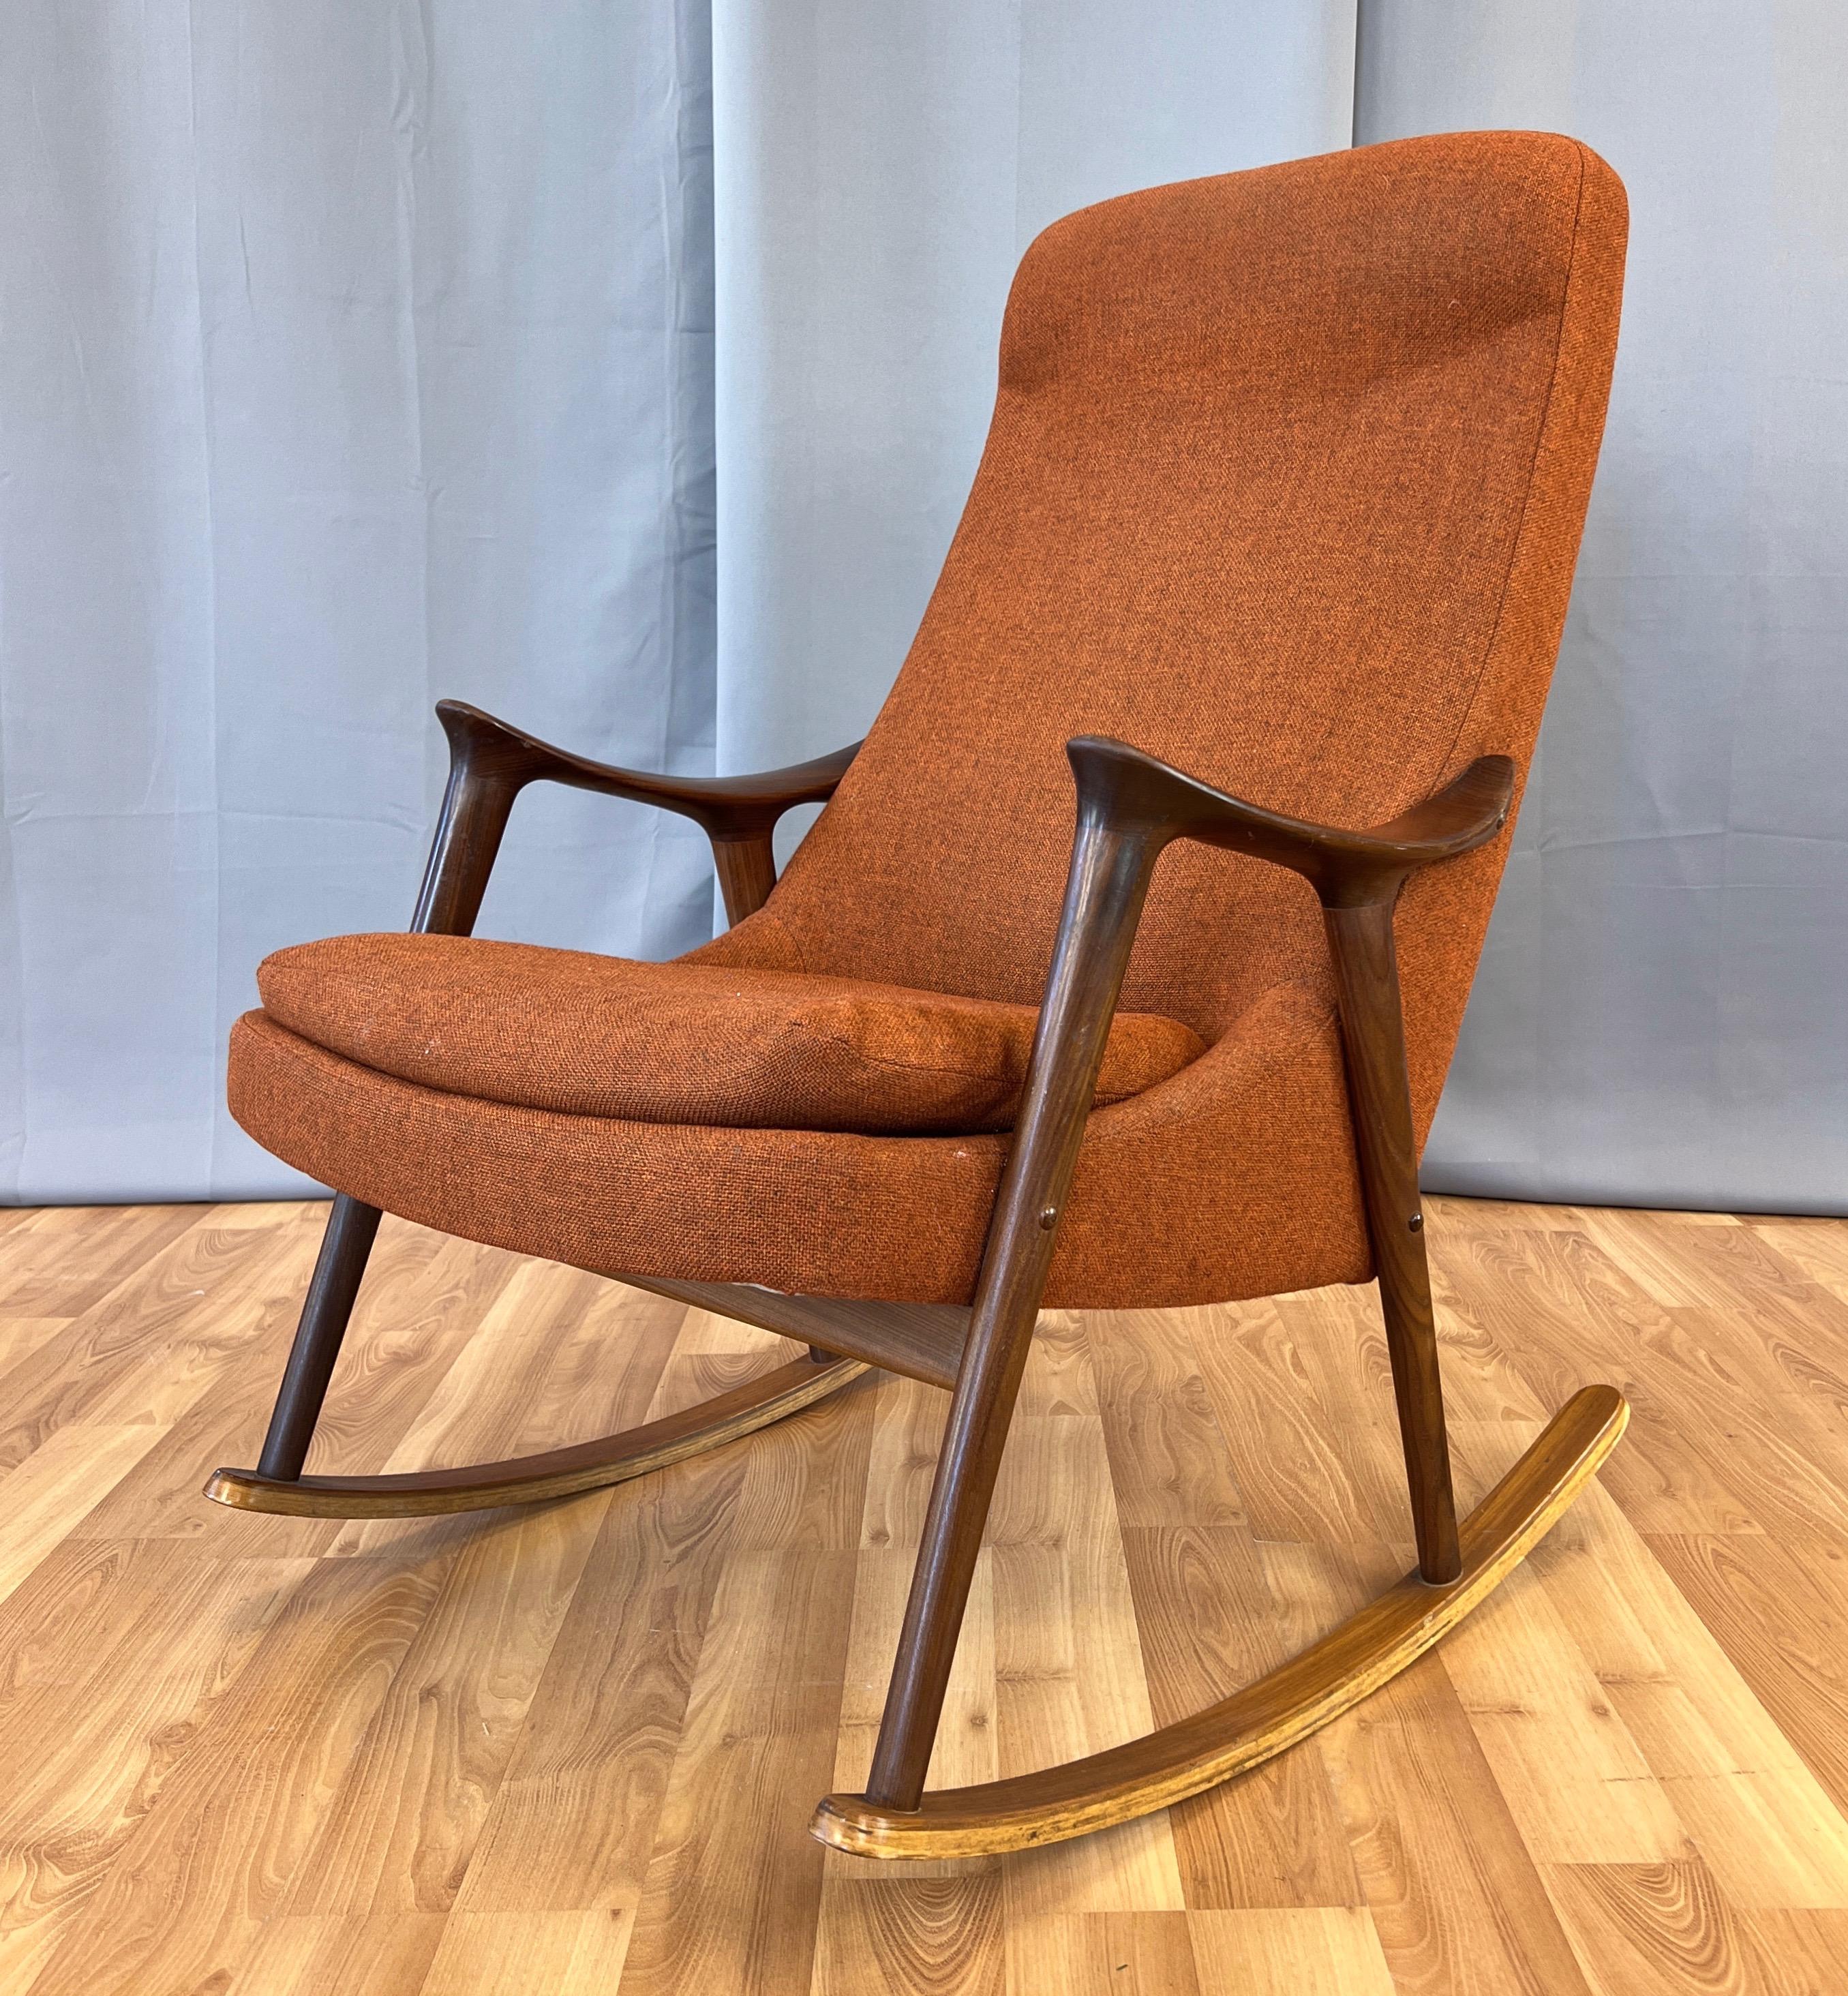 A 1960s Scandinavian Modern high-back teak rocking chair with original upholstery by Ingmar Relling for Westnofa of Norway.

Sculptural hand-crafted solid teak frame with a stained finish that resembles a cross between walnut and rosewood. On teak